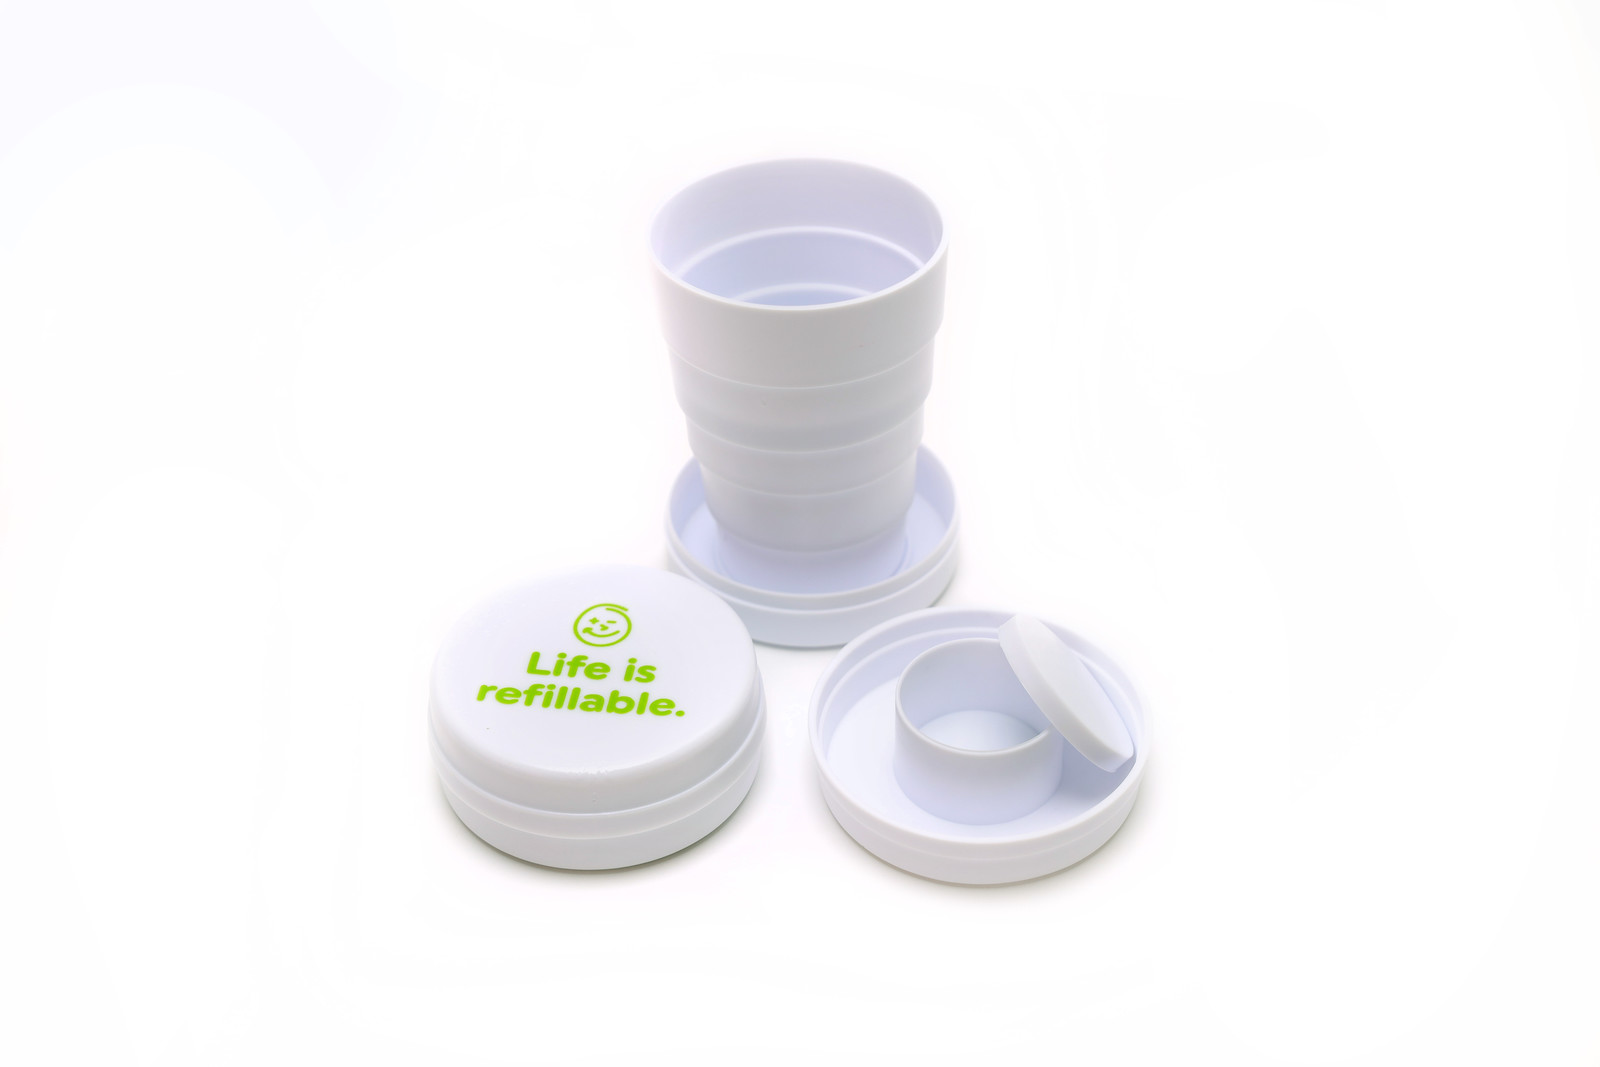 product photography, commercial photography, wellness products, humorous products, collapsible shot glass